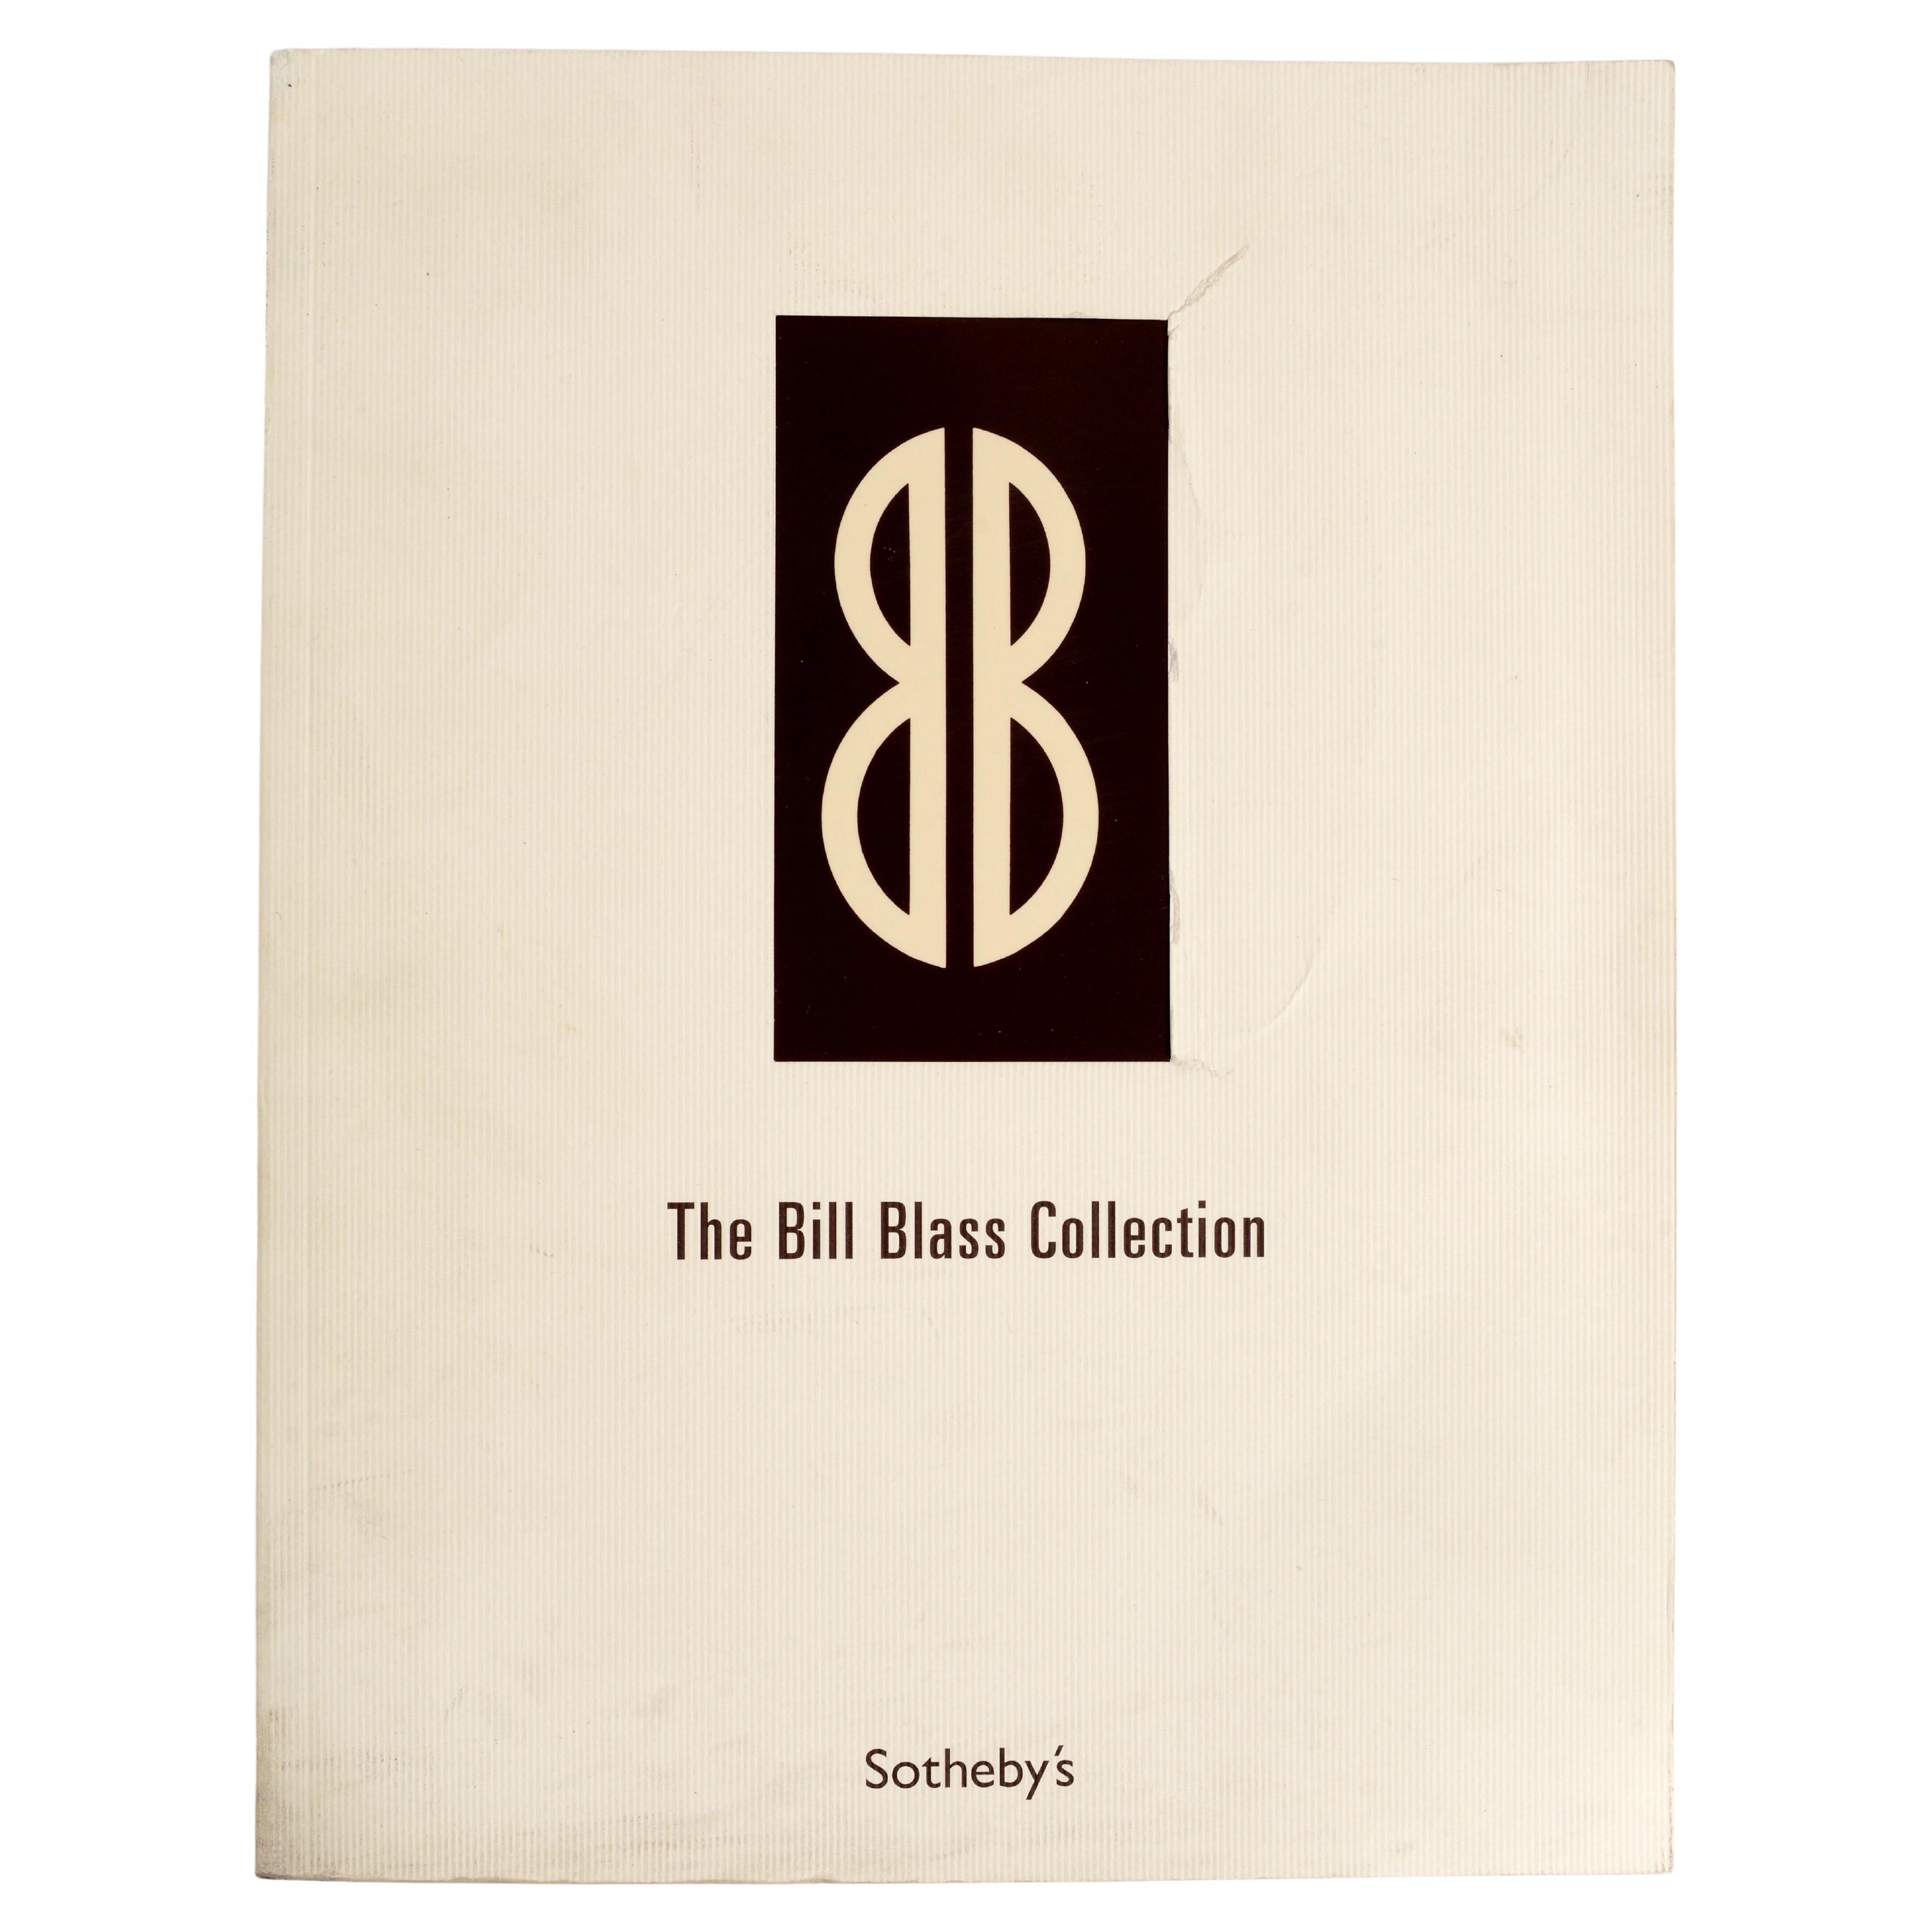 Bill Blass Collection: New York, October 21-23, 2003 Sotheby's